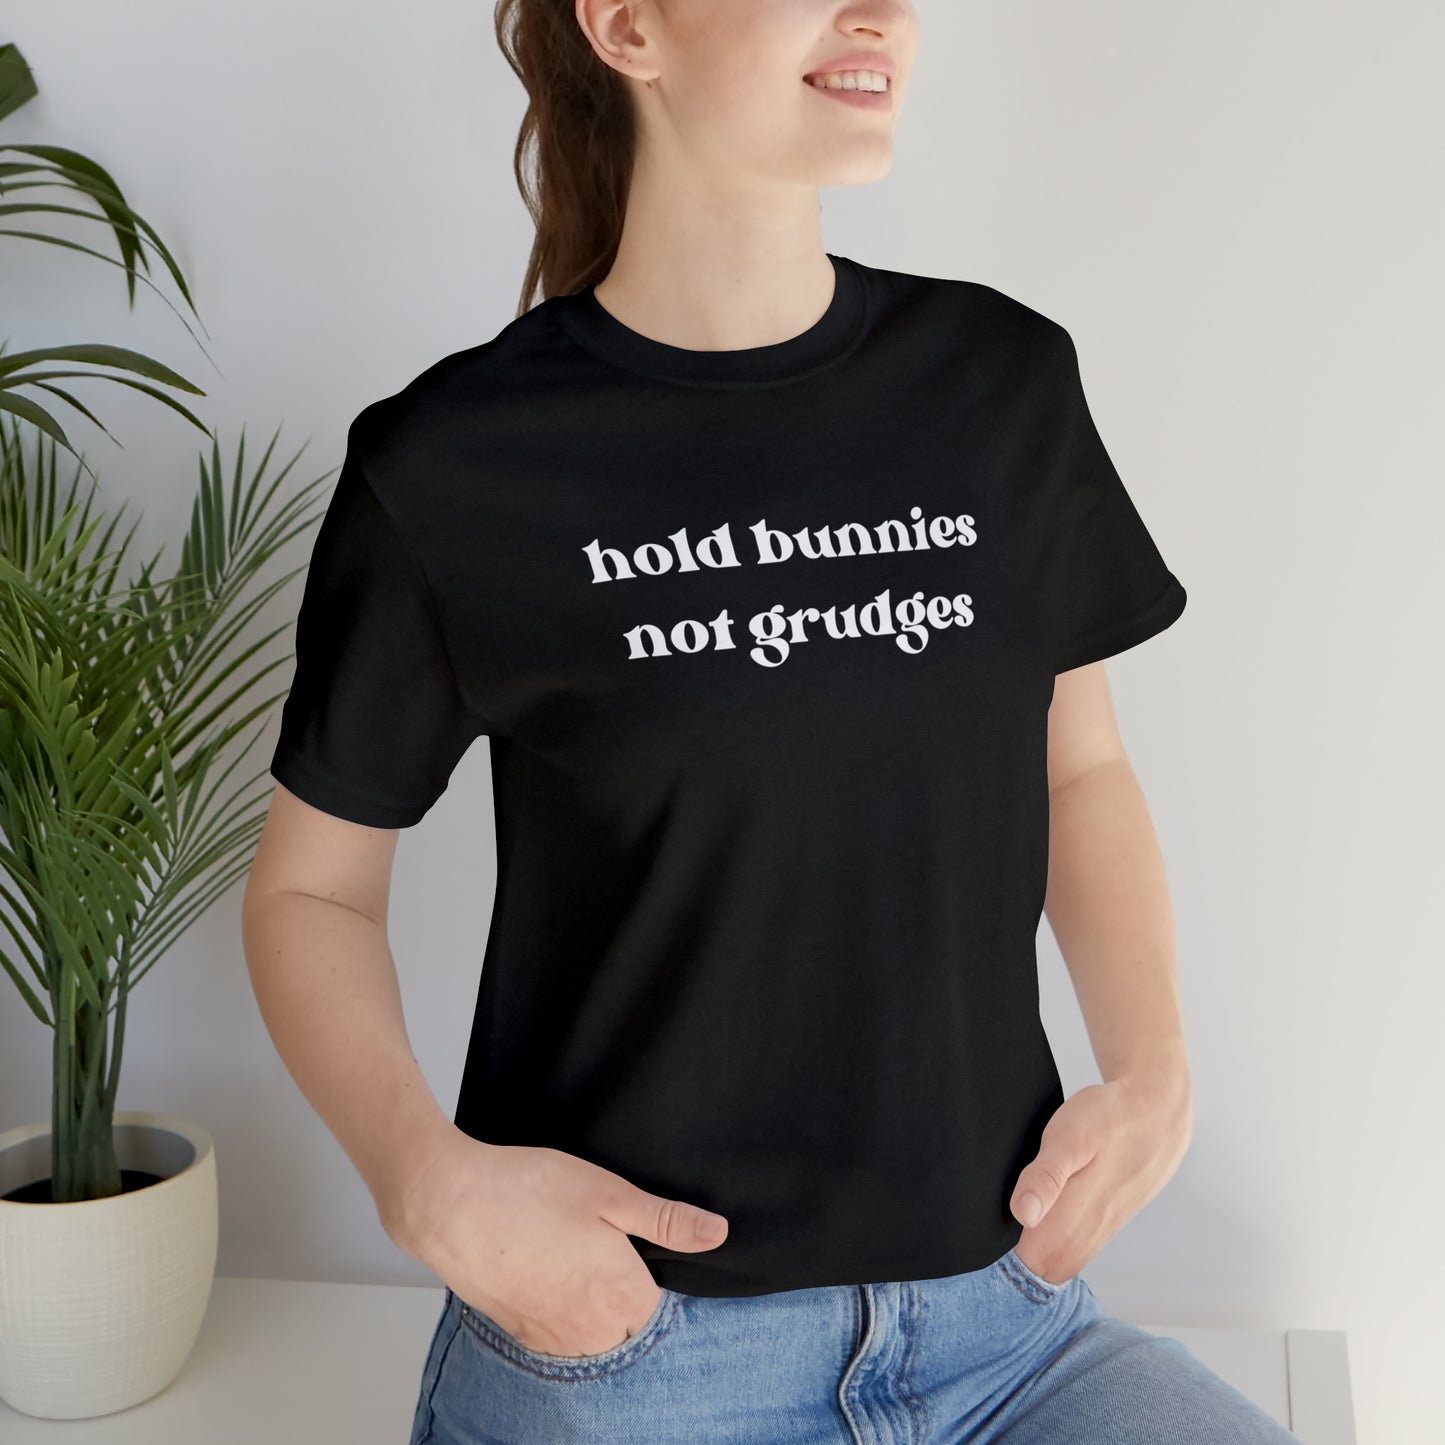 Hold Bunnies, Not Grudges Tee